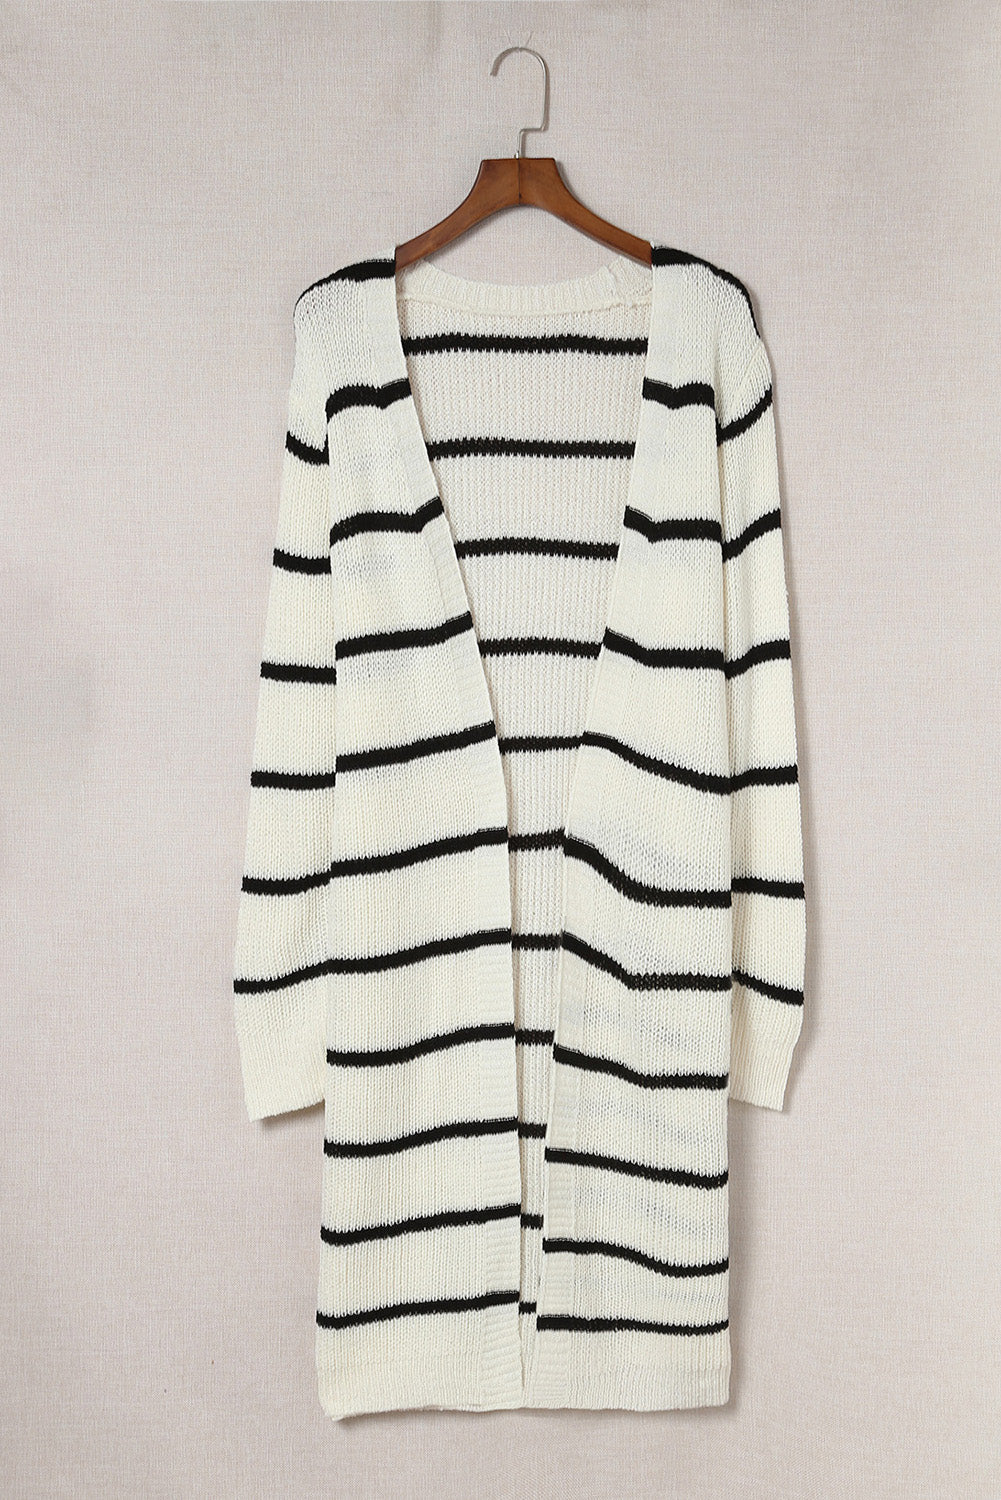 Striped Open Front Rib-Knit Duster Cardigan - LOLA LUXE